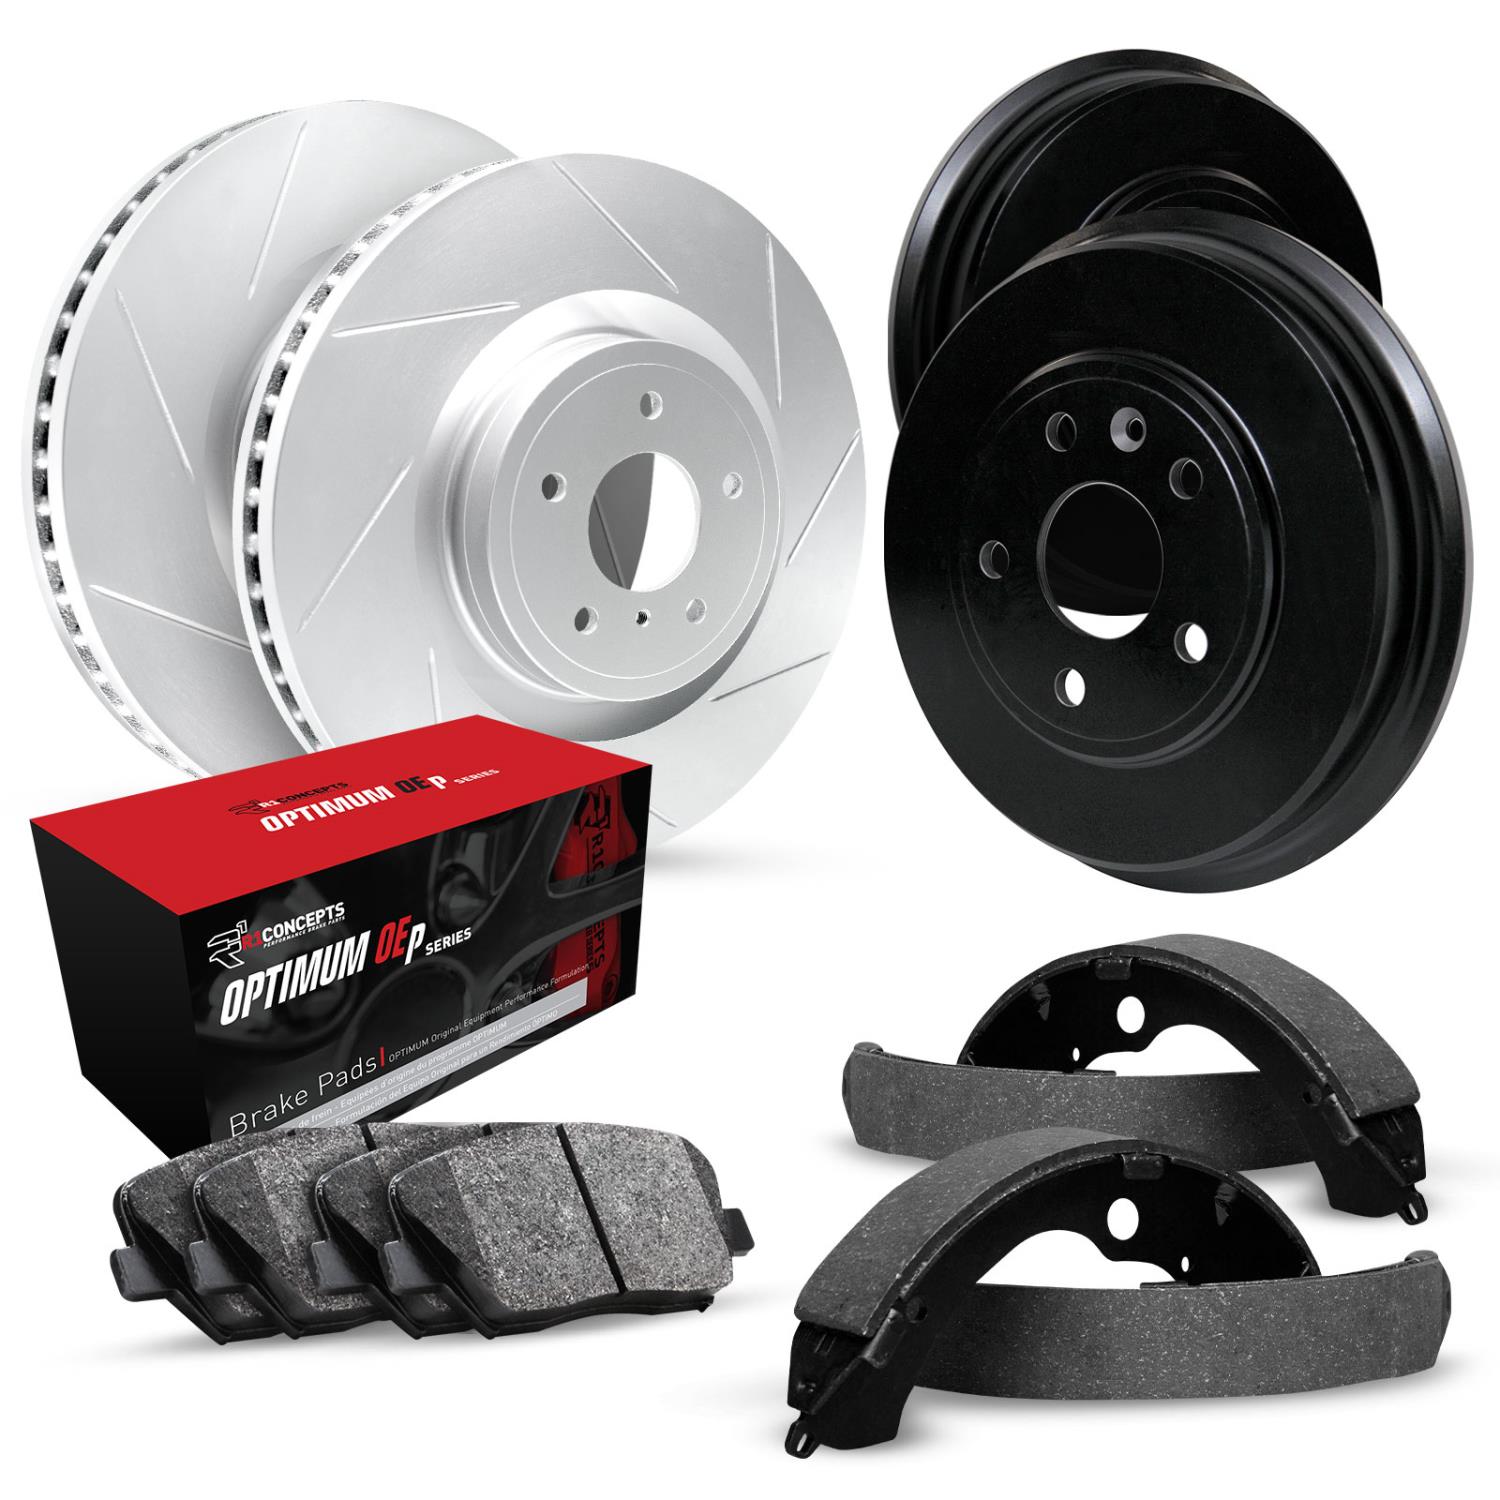 GEO-Carbon Slotted Brake Rotor & Drum Set w/Optimum OE Pads & Shoes, 1986-1987 Ford/Lincoln/Mercury/Mazda